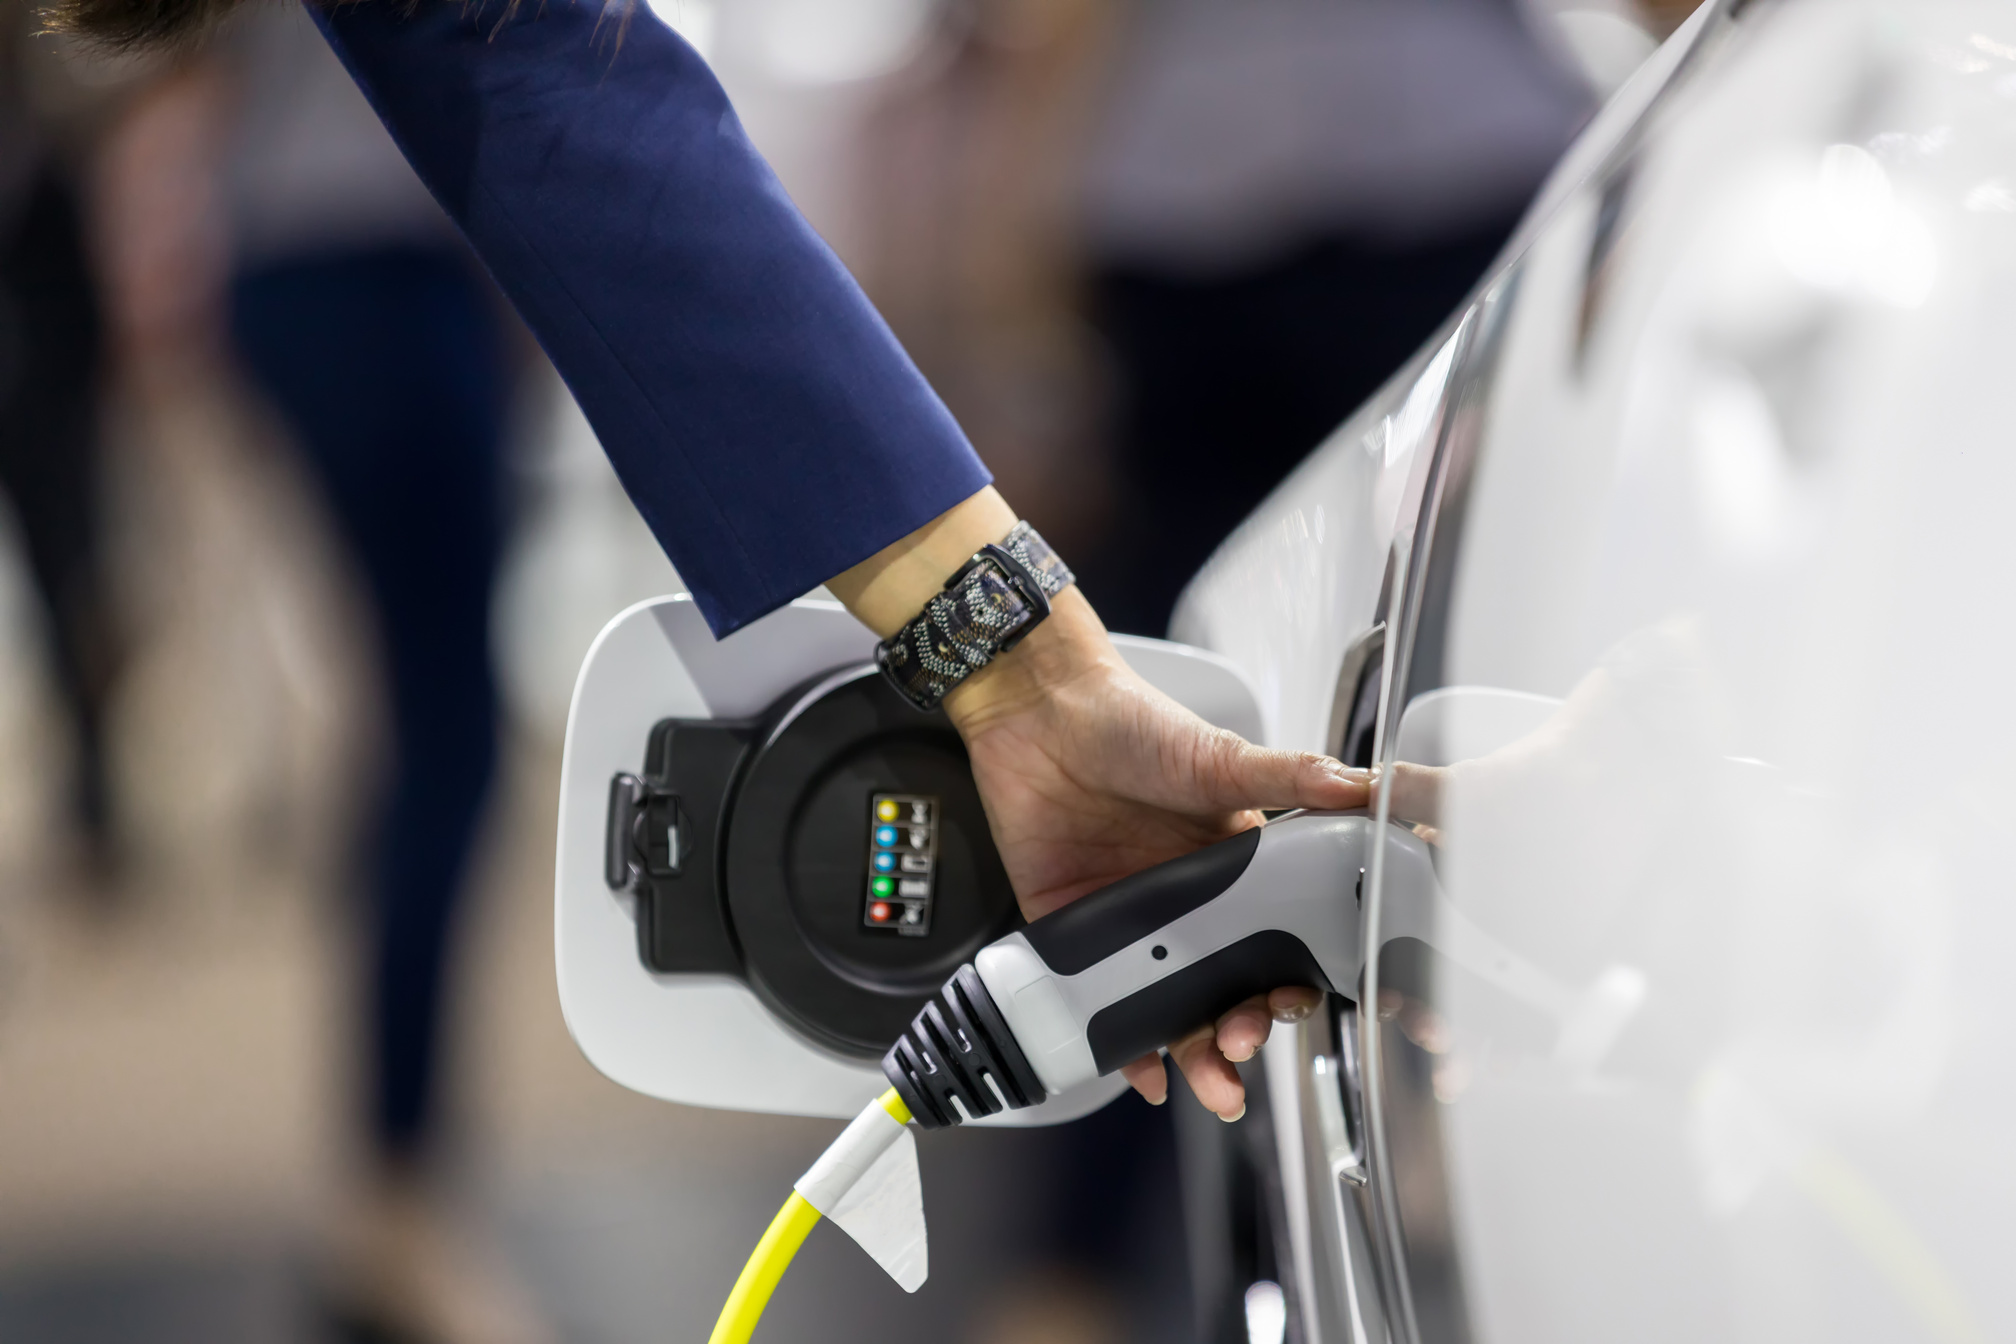 Hand holding Electric car charger. Electric Vehicle EV Charging station and Charger. Human hand is holding Electric Car Charging connect to Electric car.